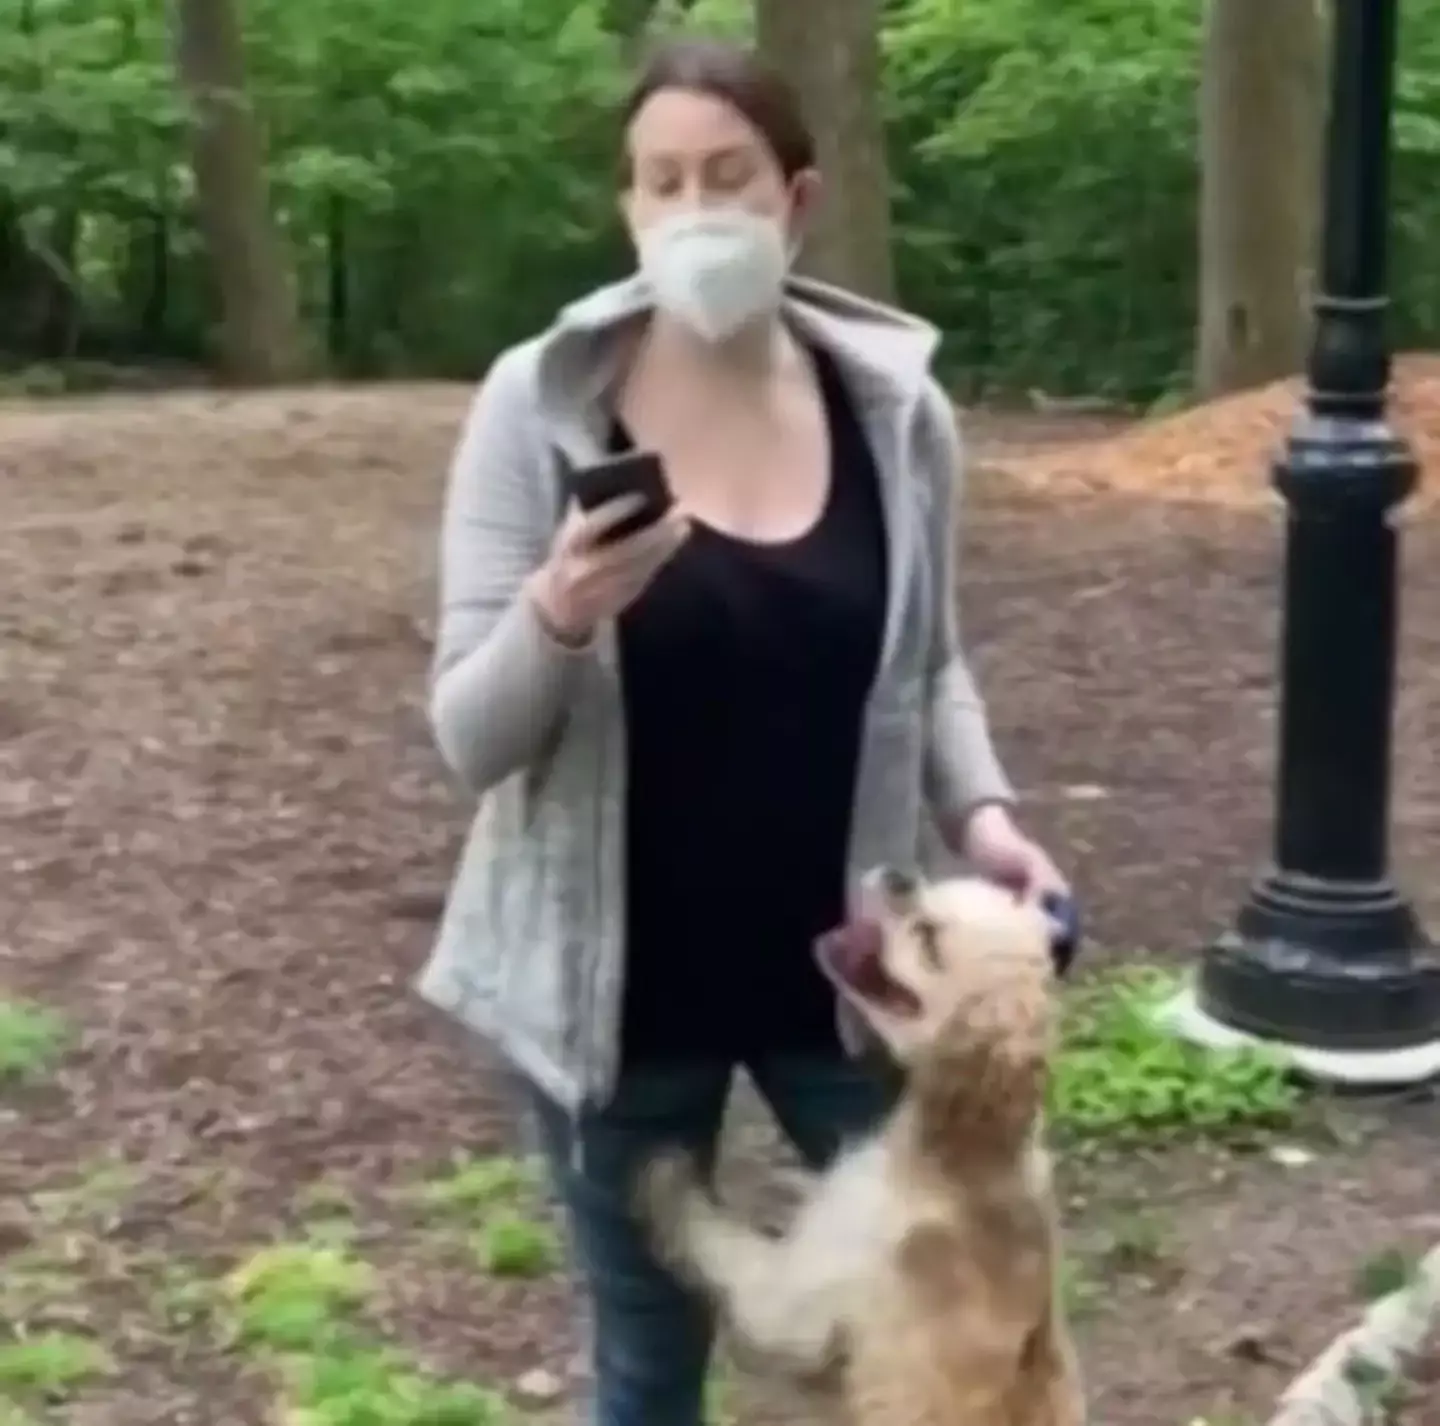 Amy Cooper went viral after she called 911 on Christian Cooper for approaching her after he asked for her dog to be put on a lead.